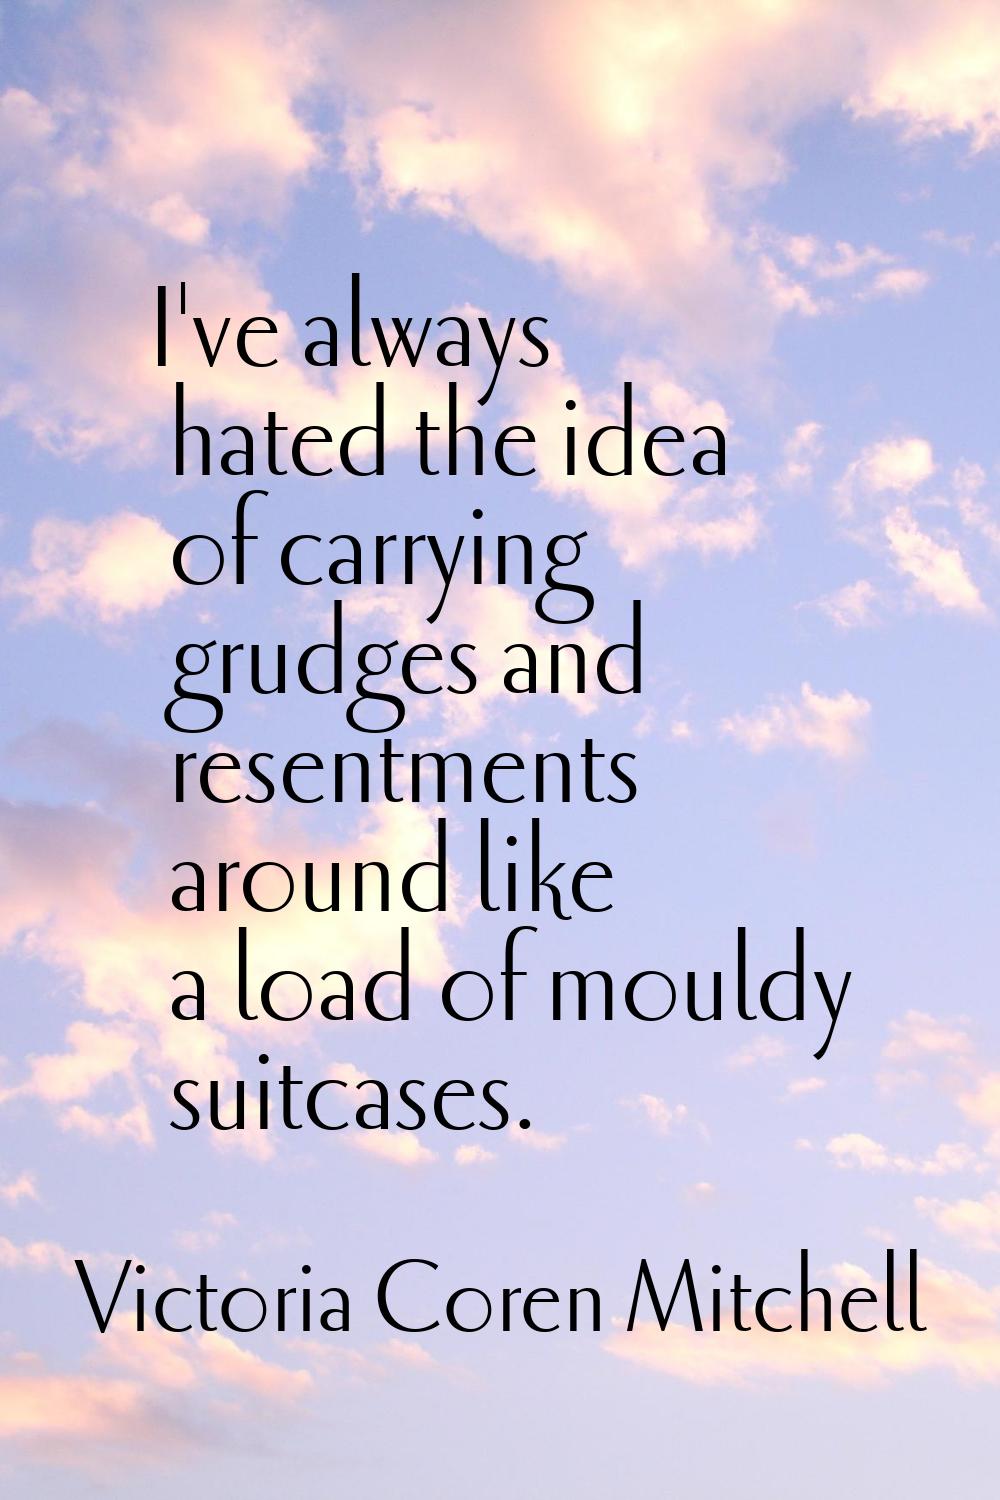 I've always hated the idea of carrying grudges and resentments around like a load of mouldy suitcas